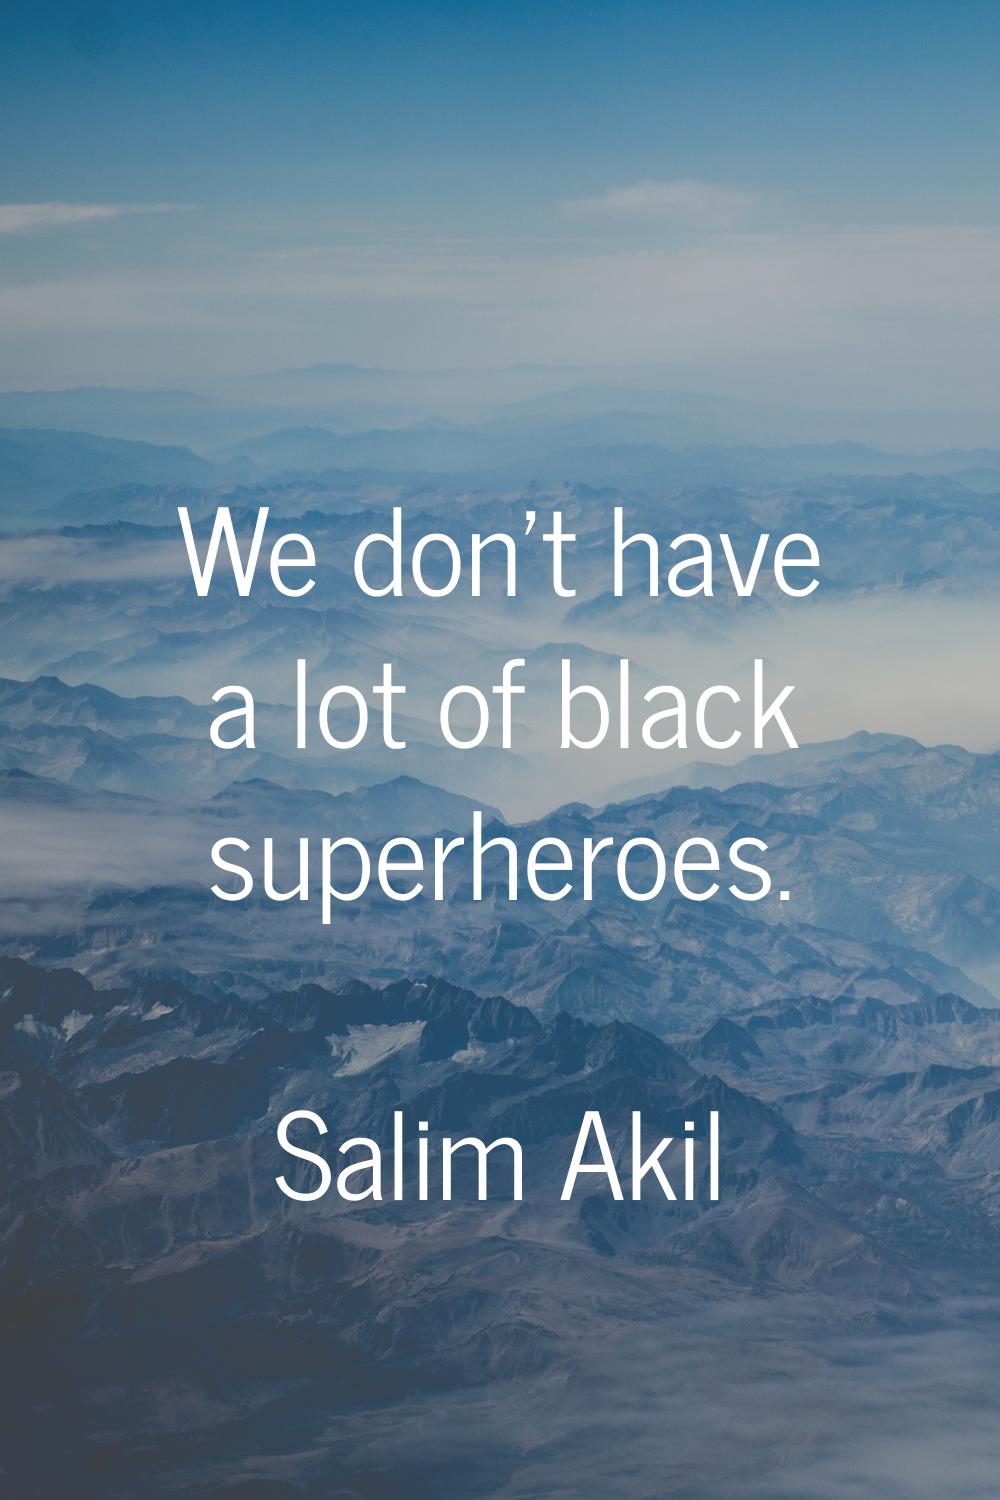 We don't have a lot of black superheroes.